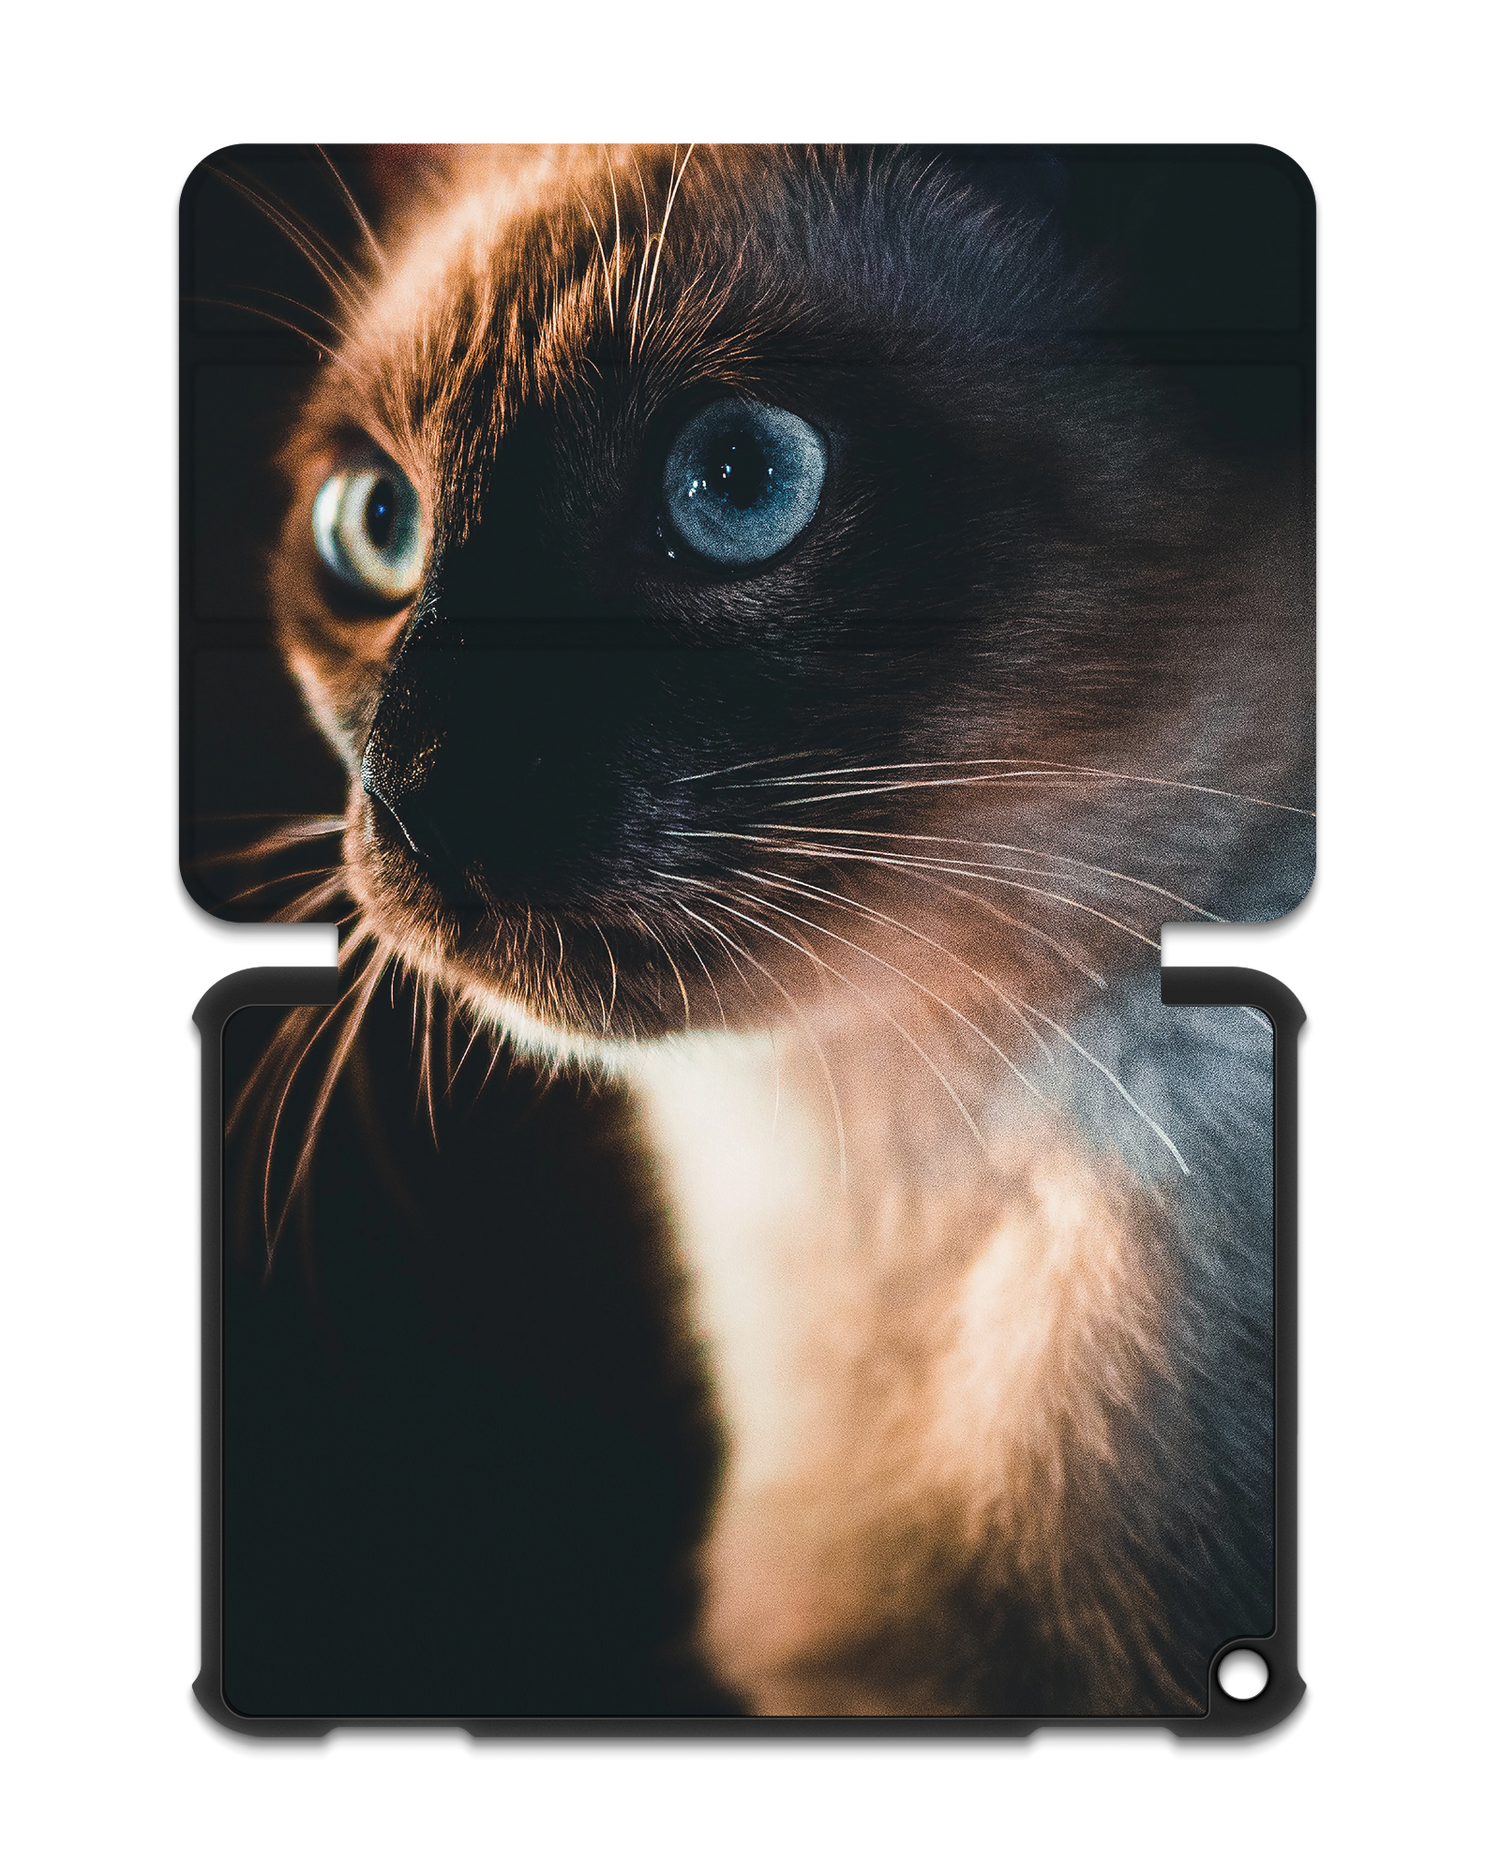 Siamese Cat Tablet Smart Case for Amazon Fire HD 8 (2022), Amazon Fire HD 8 Plus (2022), Amazon Fire HD 8 (2020), Amazon Fire HD 8 Plus (2020): Opened